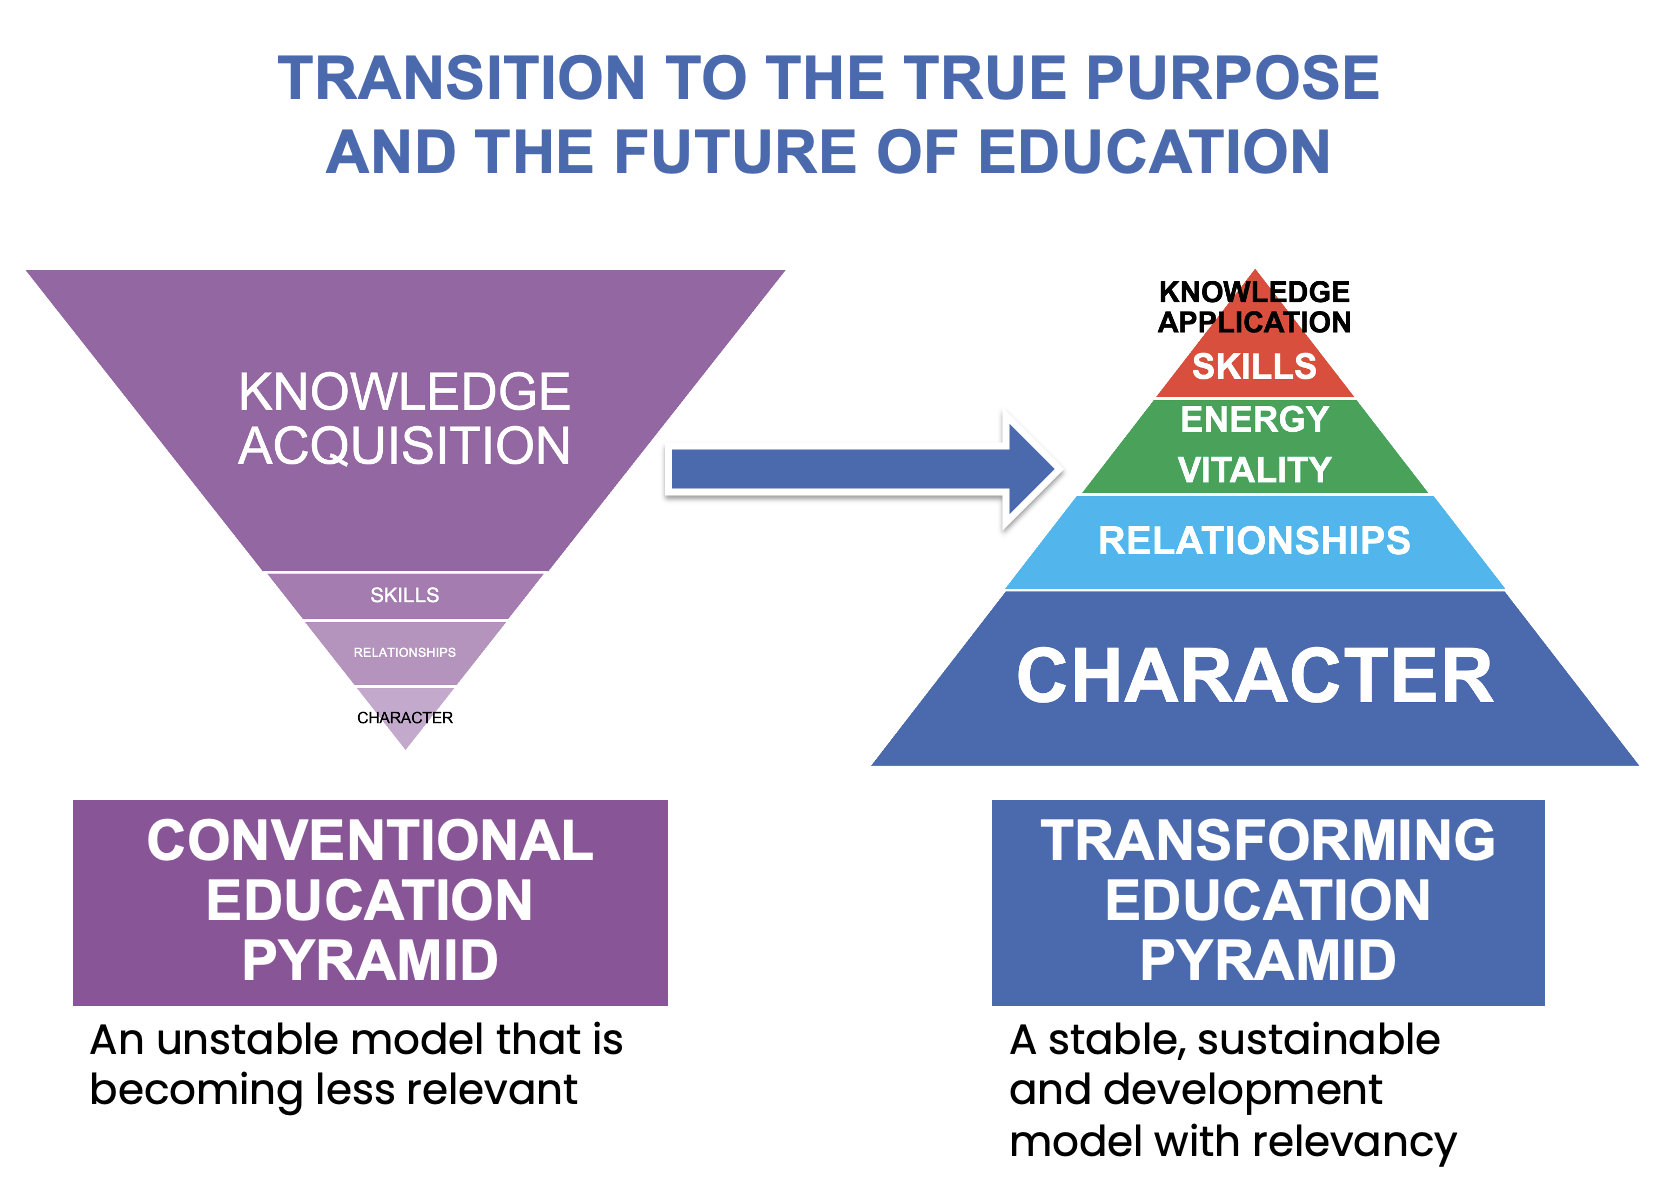 Comparison of conventional and transforming education models, highlighting the transition from knowledge acquisition to the development of character with sustainable relevance in the context of transforming education.